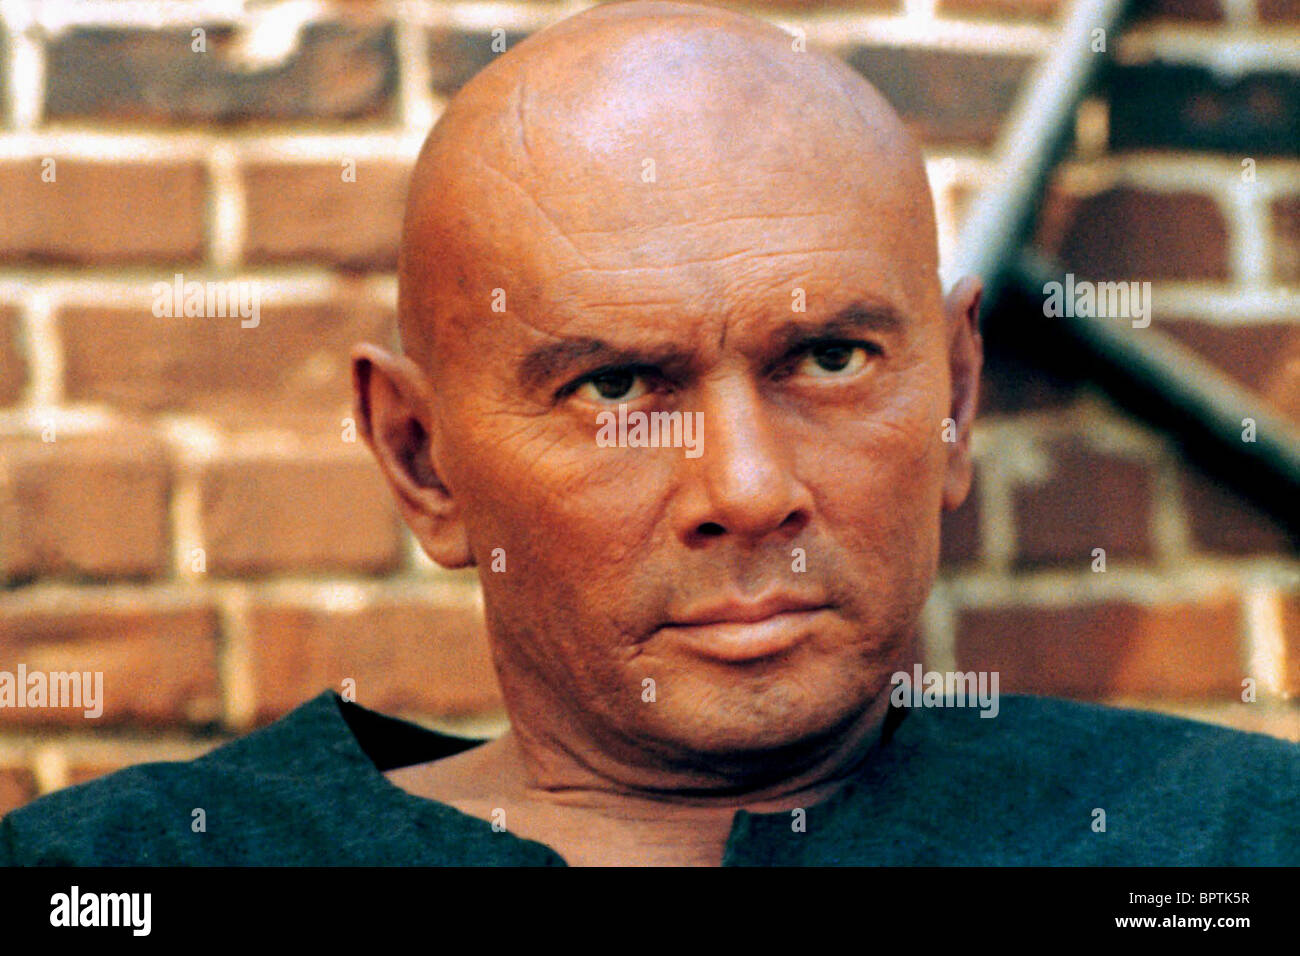 YUL BRYNNER ACTOR (1965) Stock Photo